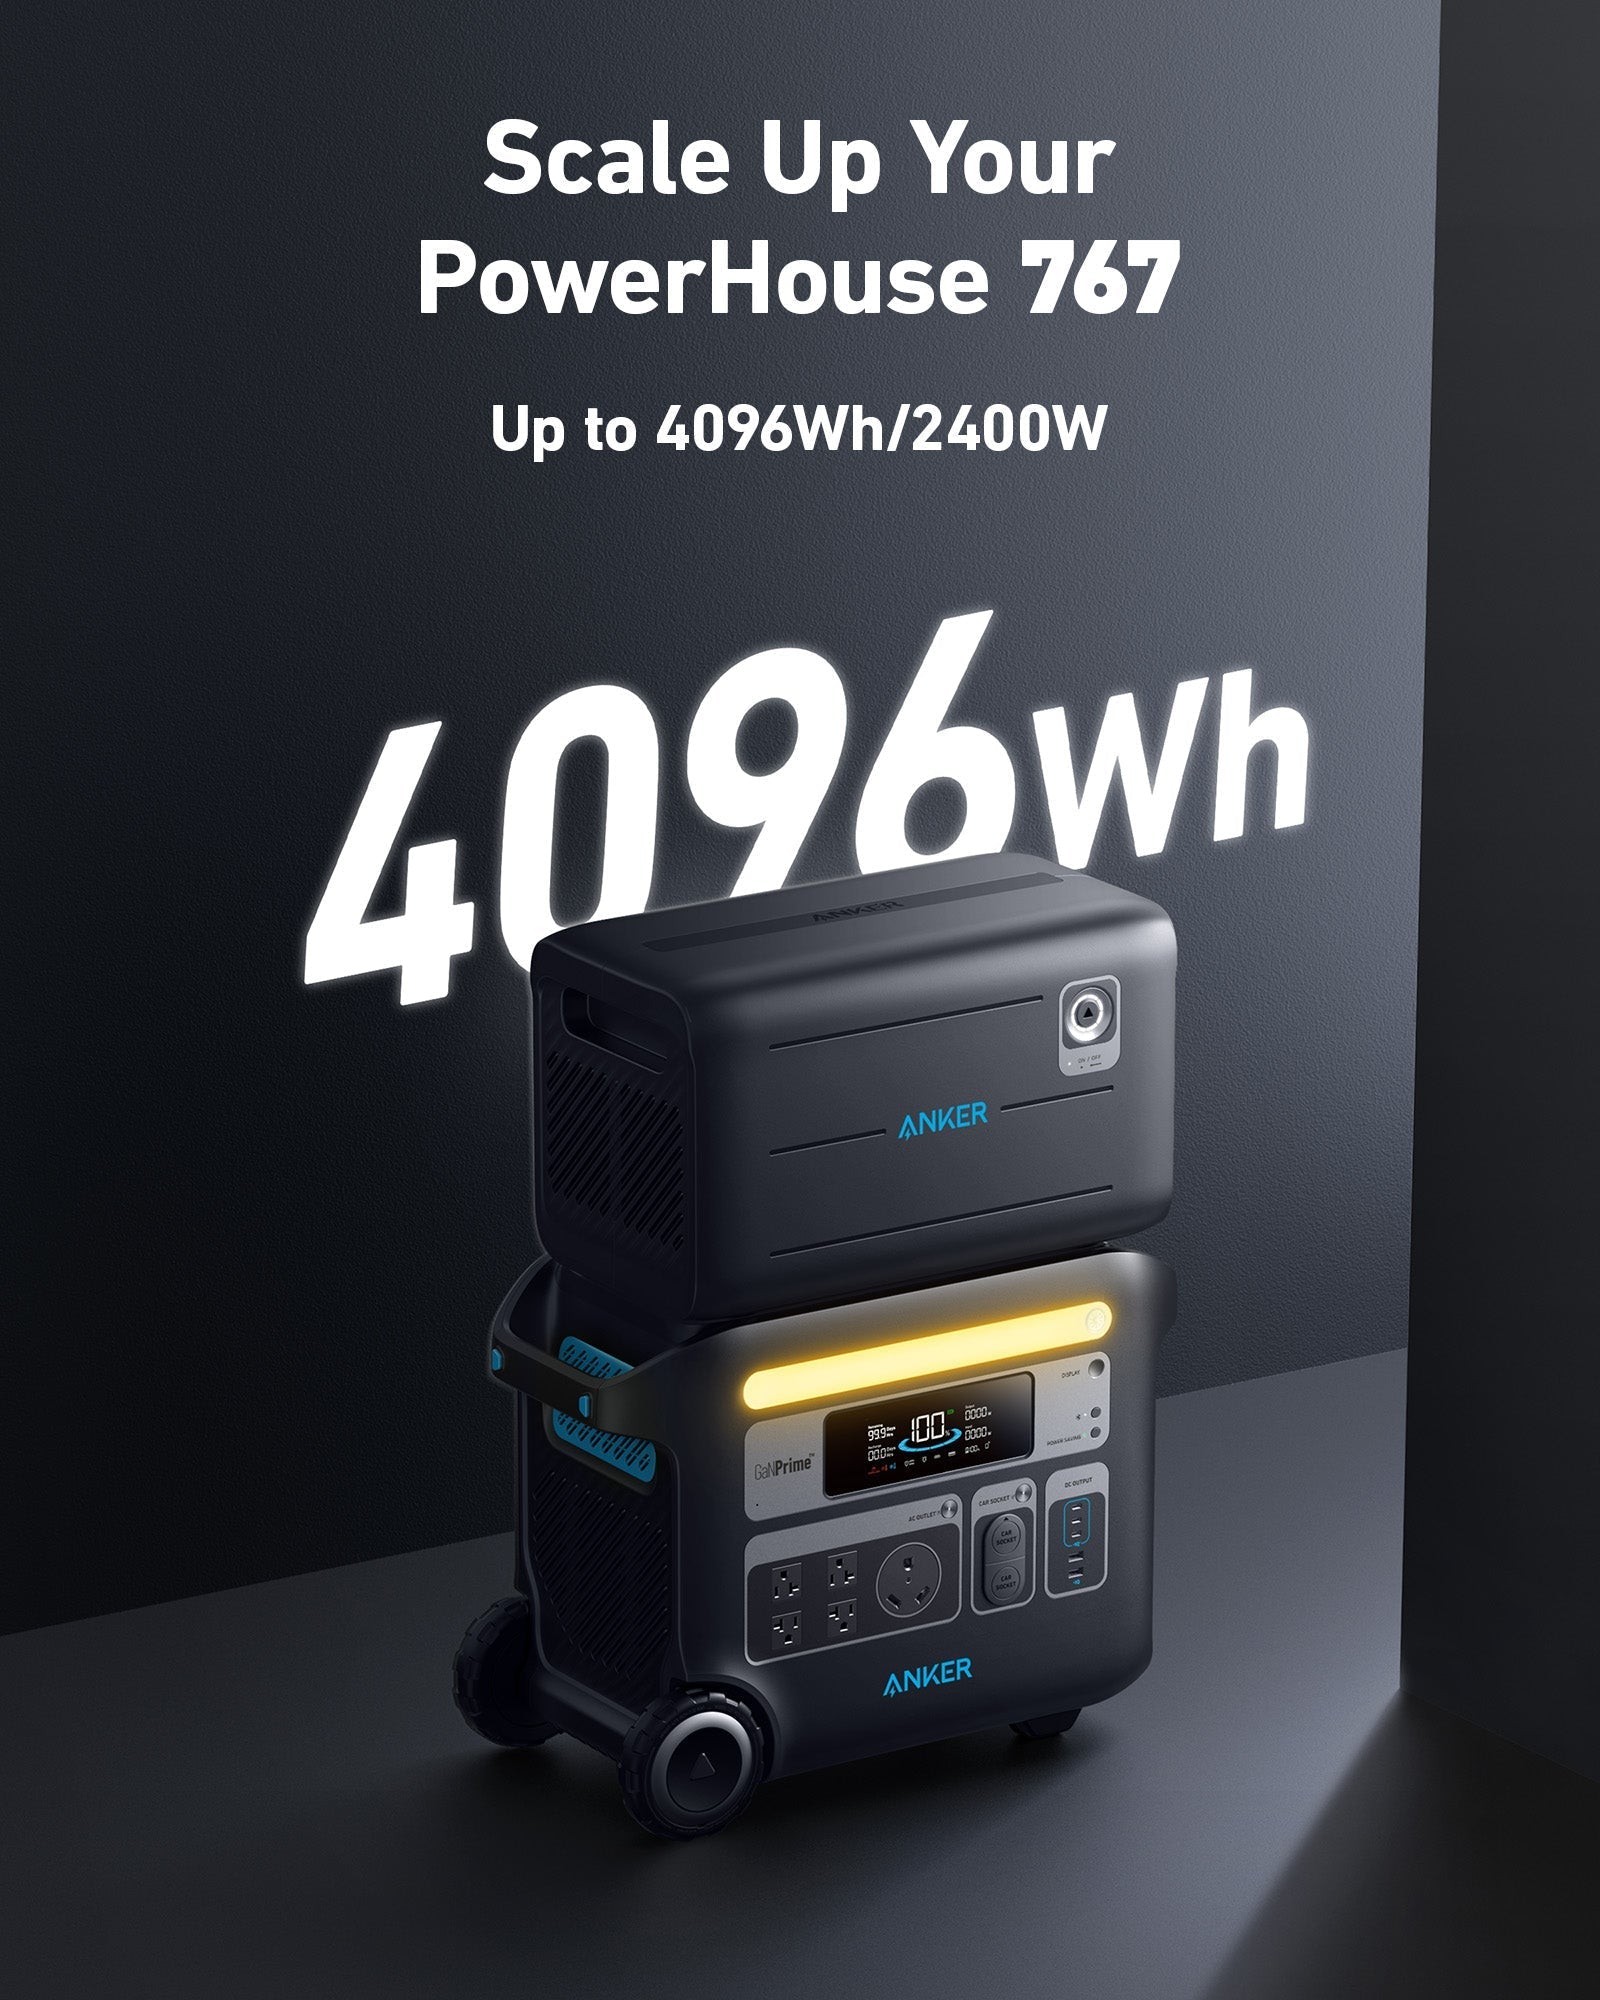 Anker PowerHouse 767 with Expansion Battery